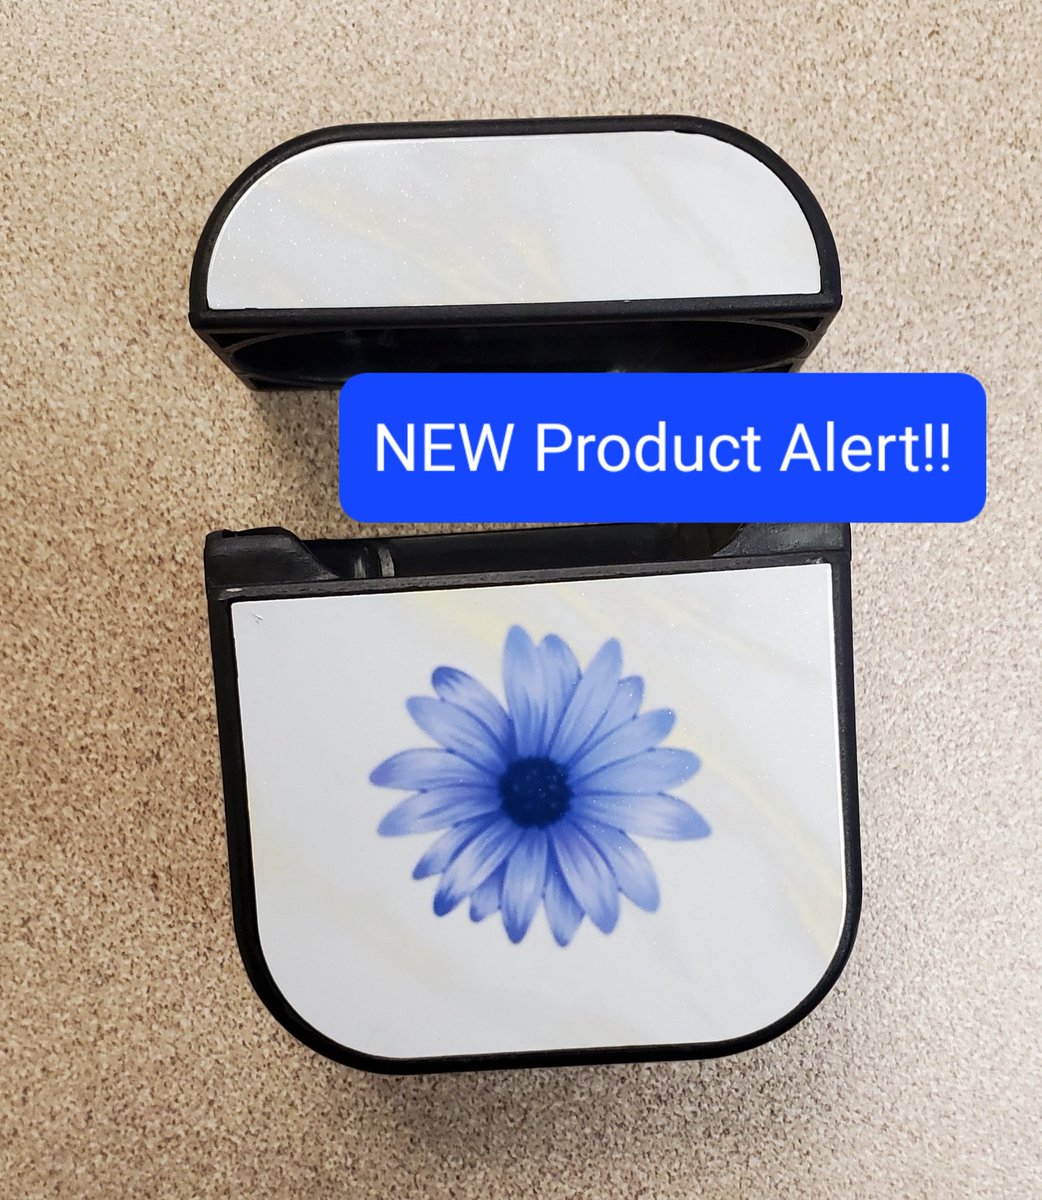 #BWCreations has a new product! Air Pod cases! Each case can be customized for you! DM me for more details. Only $8 each! @CMDunn45 @RWScholars #edcorps #studentrun #airpodcases